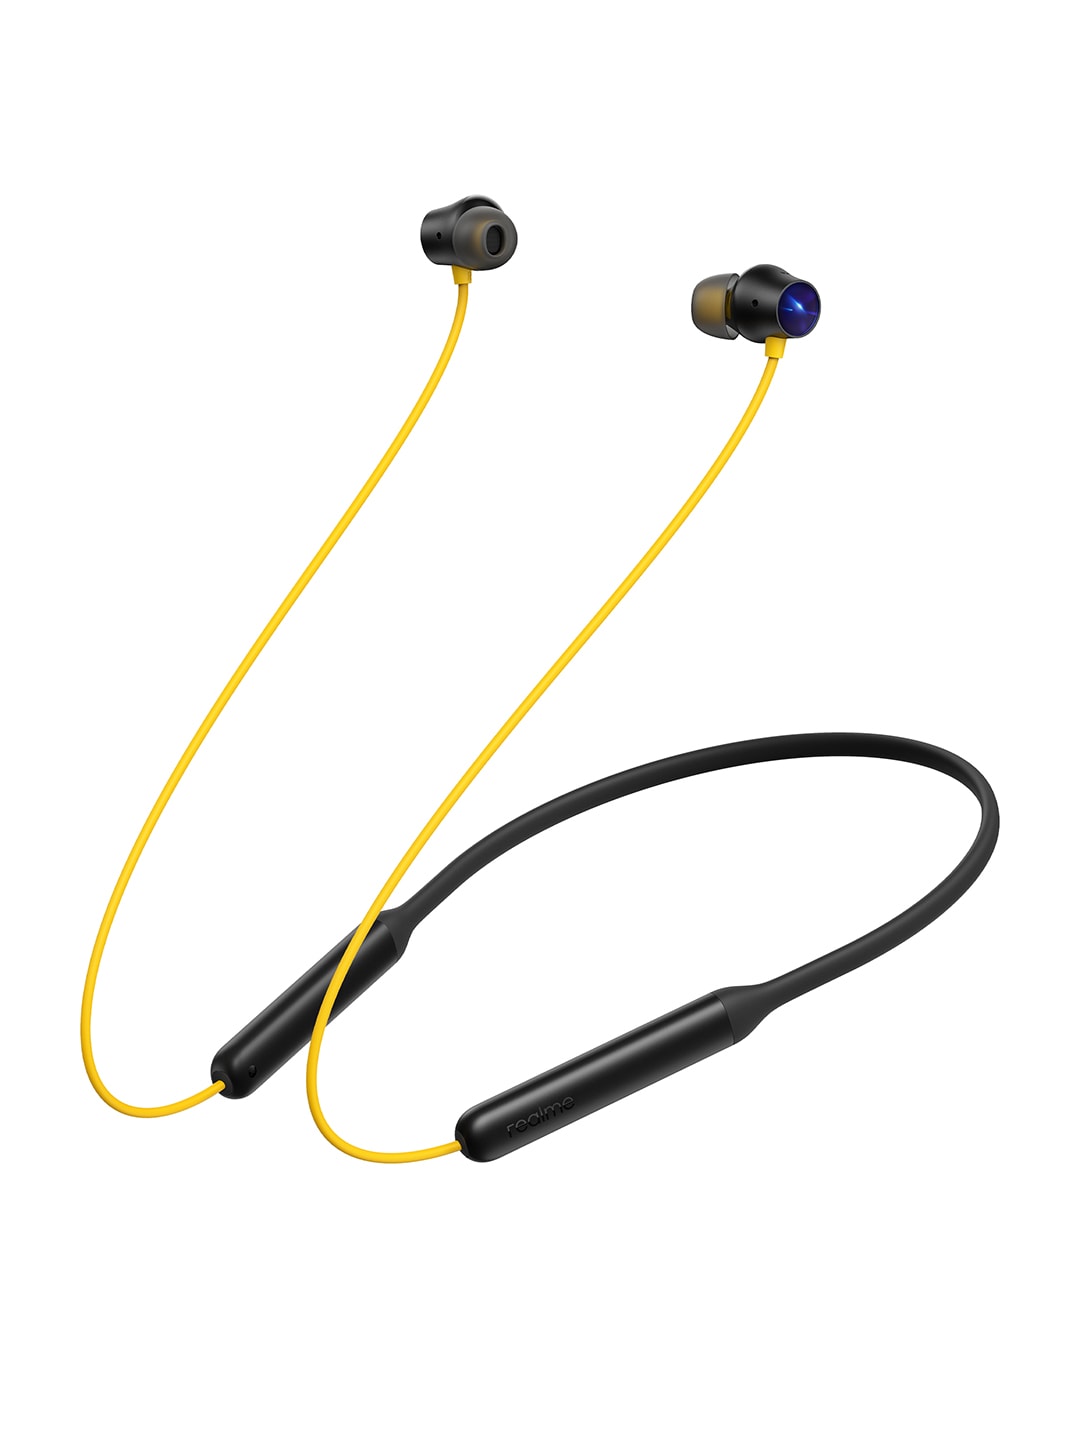 Realme Wireless 2 with Dart Charge and Active Noise Cancellation Headset - Yellow Price in India